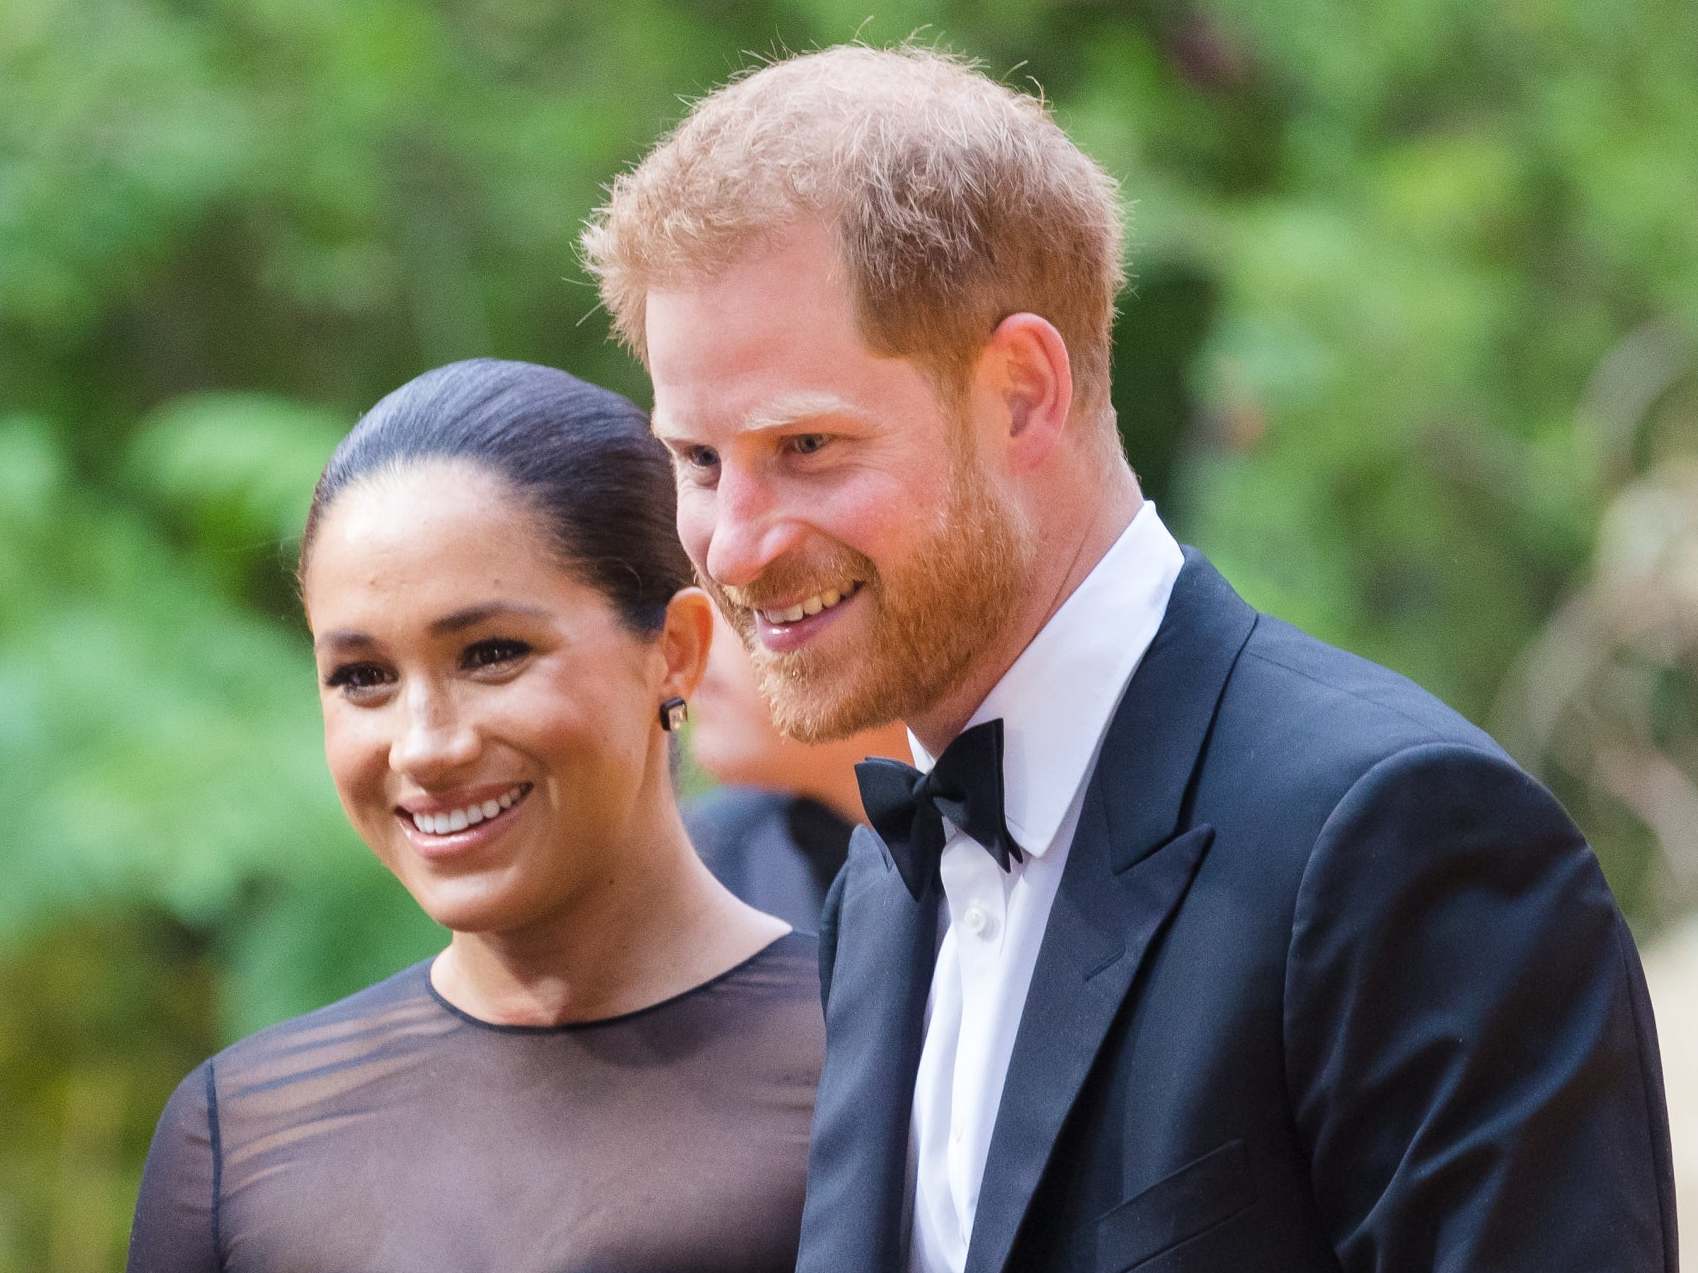 The Duke and Duchess of Sussex recently took four private jet flights